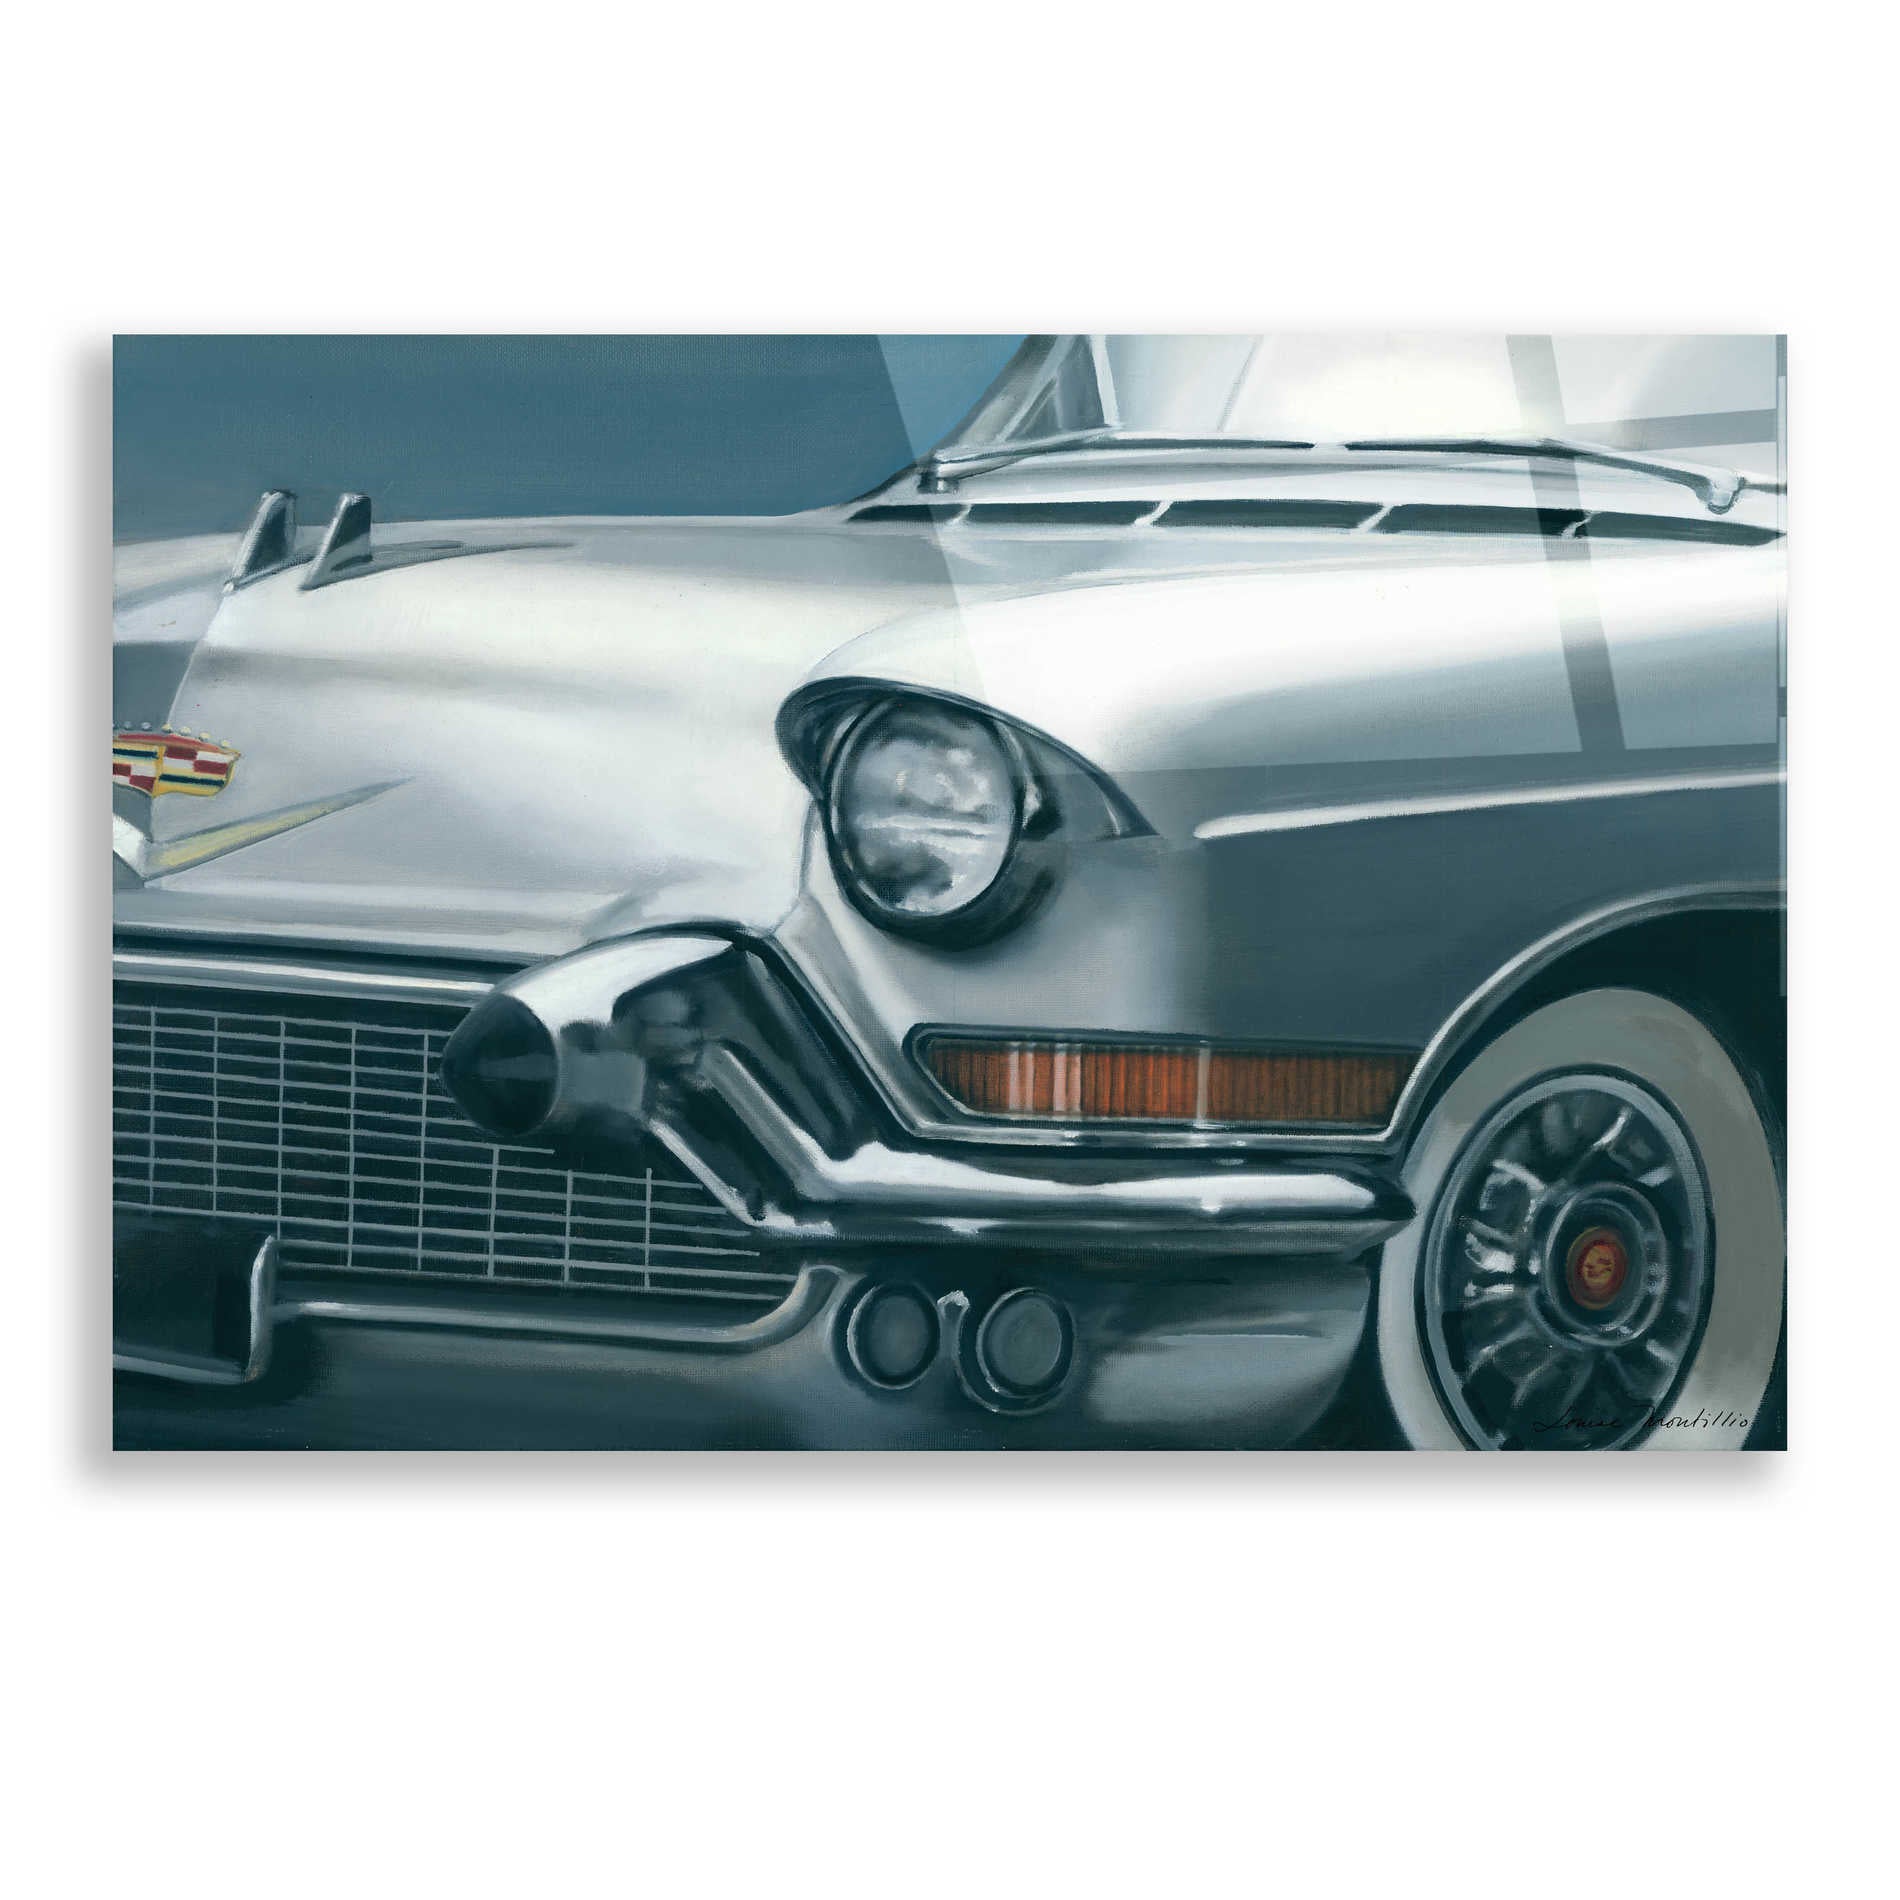 Epic Art 'Vintage Silver Caddy' by Louise Montillio, Acrylic Glass Wall Art,24x16